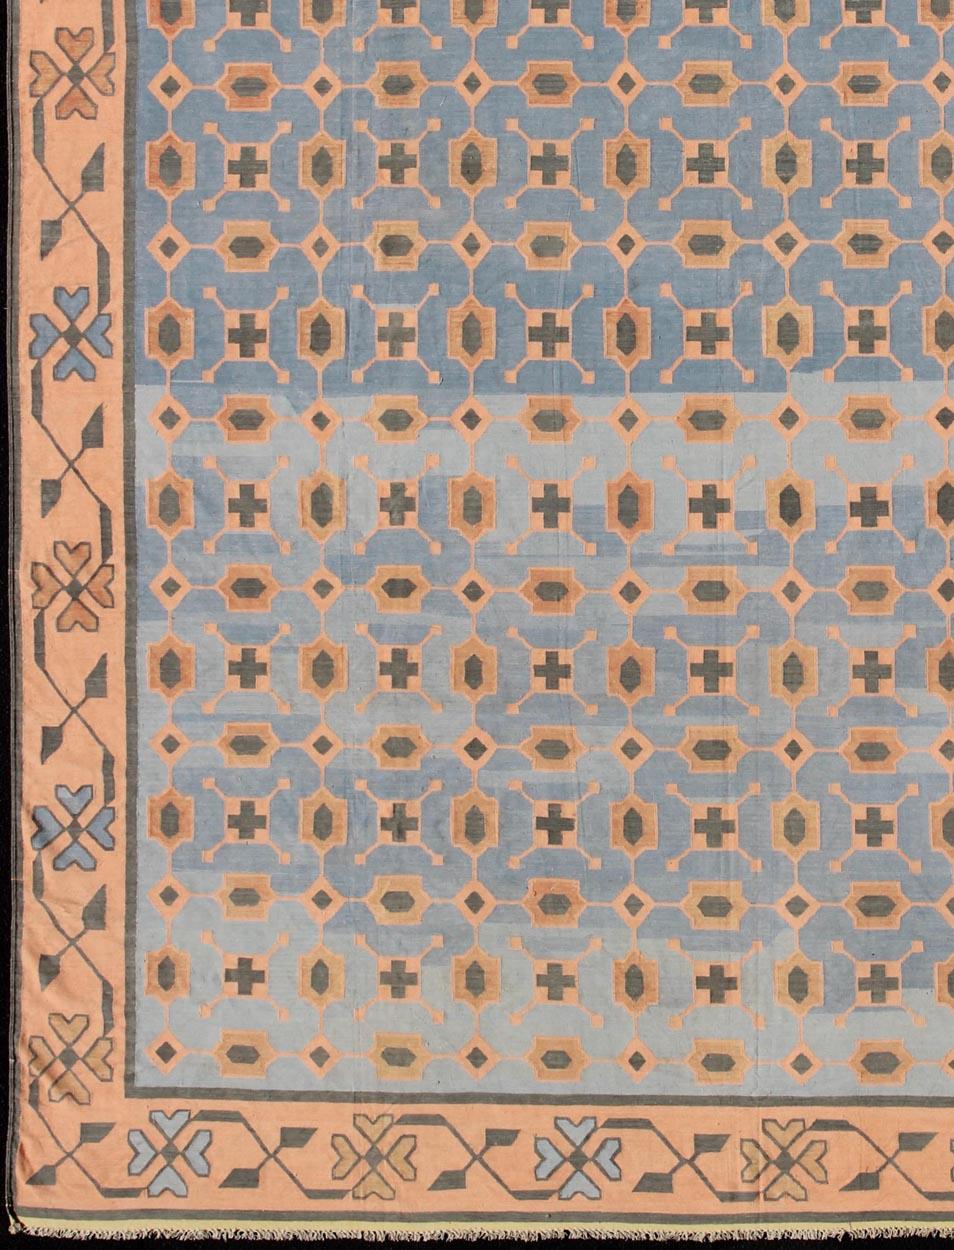 Colorful vintage Indian Dhurrie with small scale geometric design, rug 19-0504, country of origin / type: India / Dhurrie, circa 1960

Woven during the second half of the 20th century, this designer flat-woven Indian cotton dhurrie is decorated